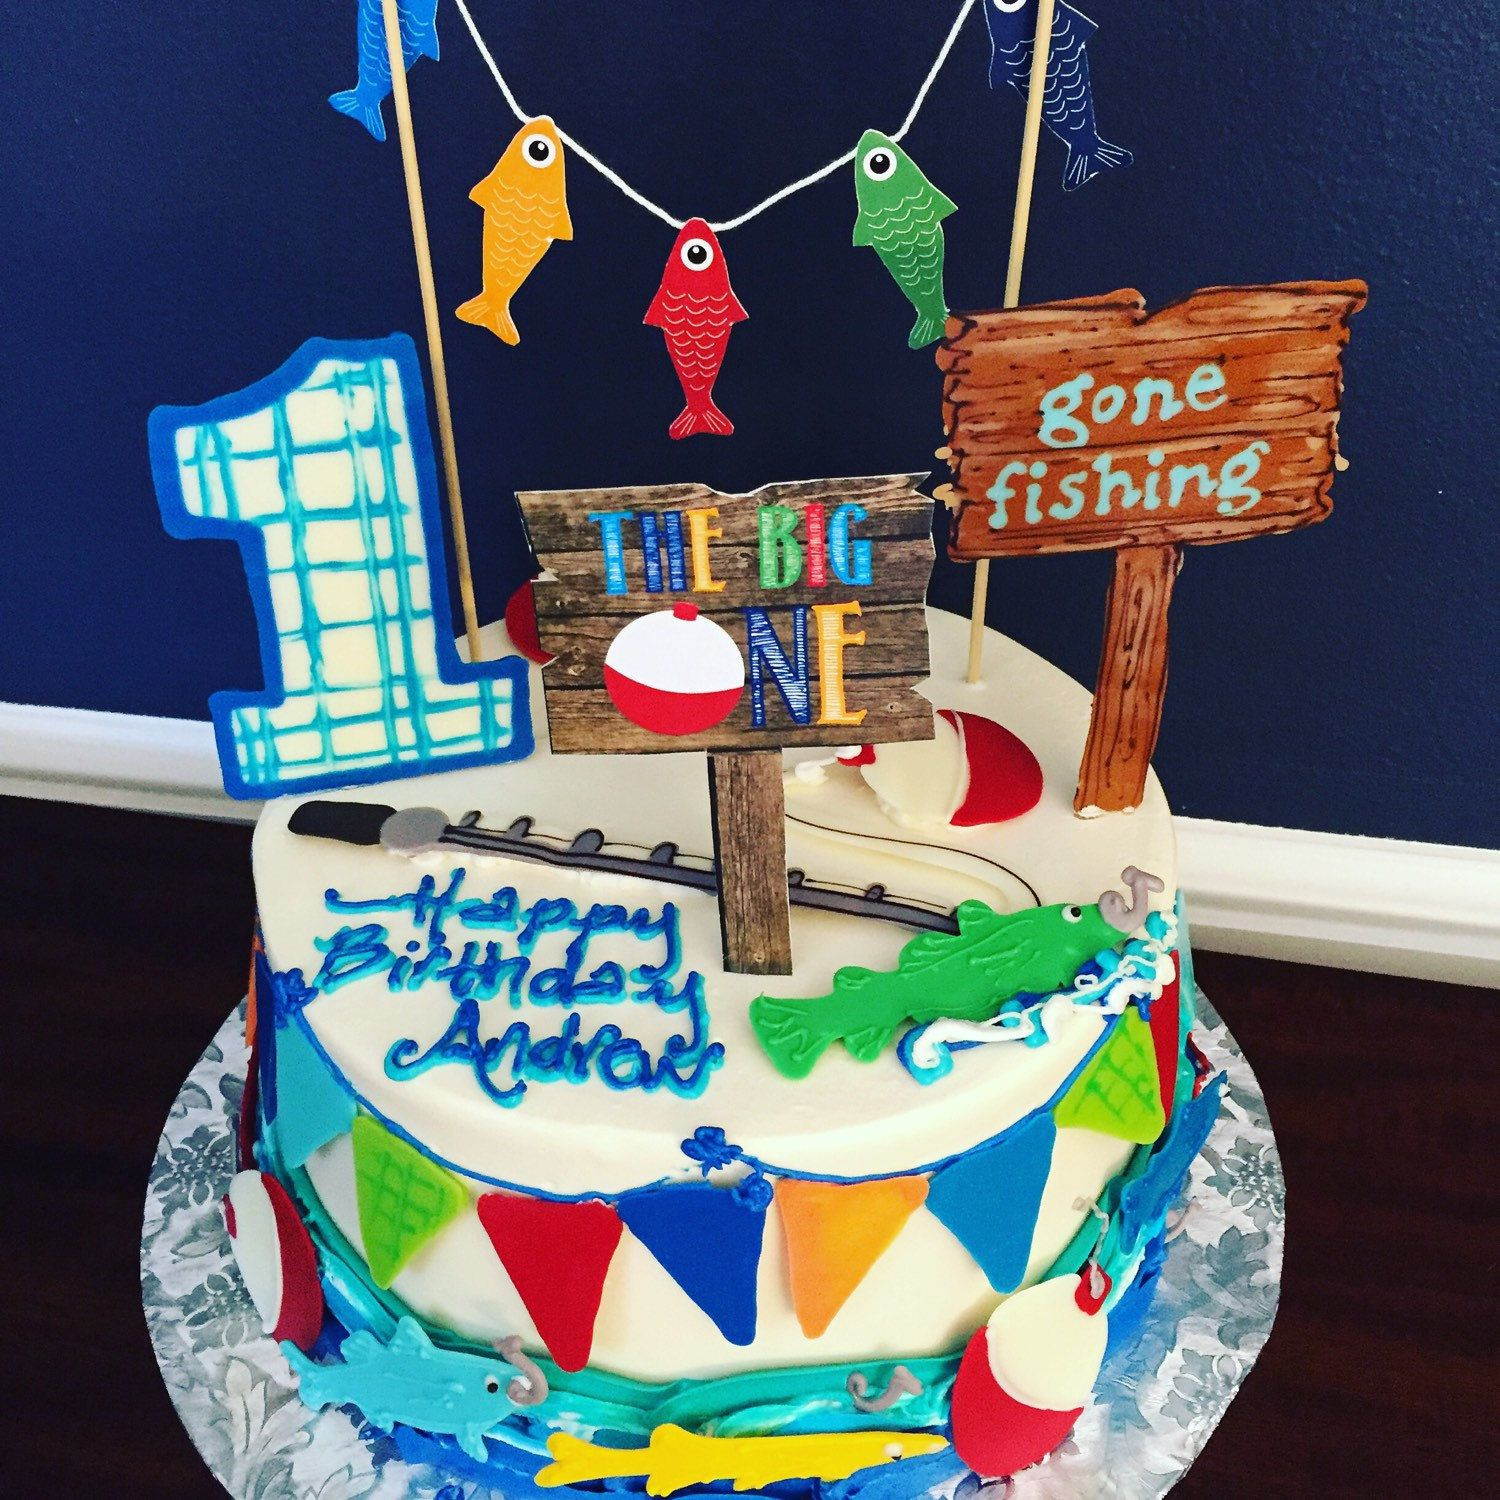 Fishing Birthday Cake Ideas
 This fishing cake is so adorable Gone Fishing Cake Topper